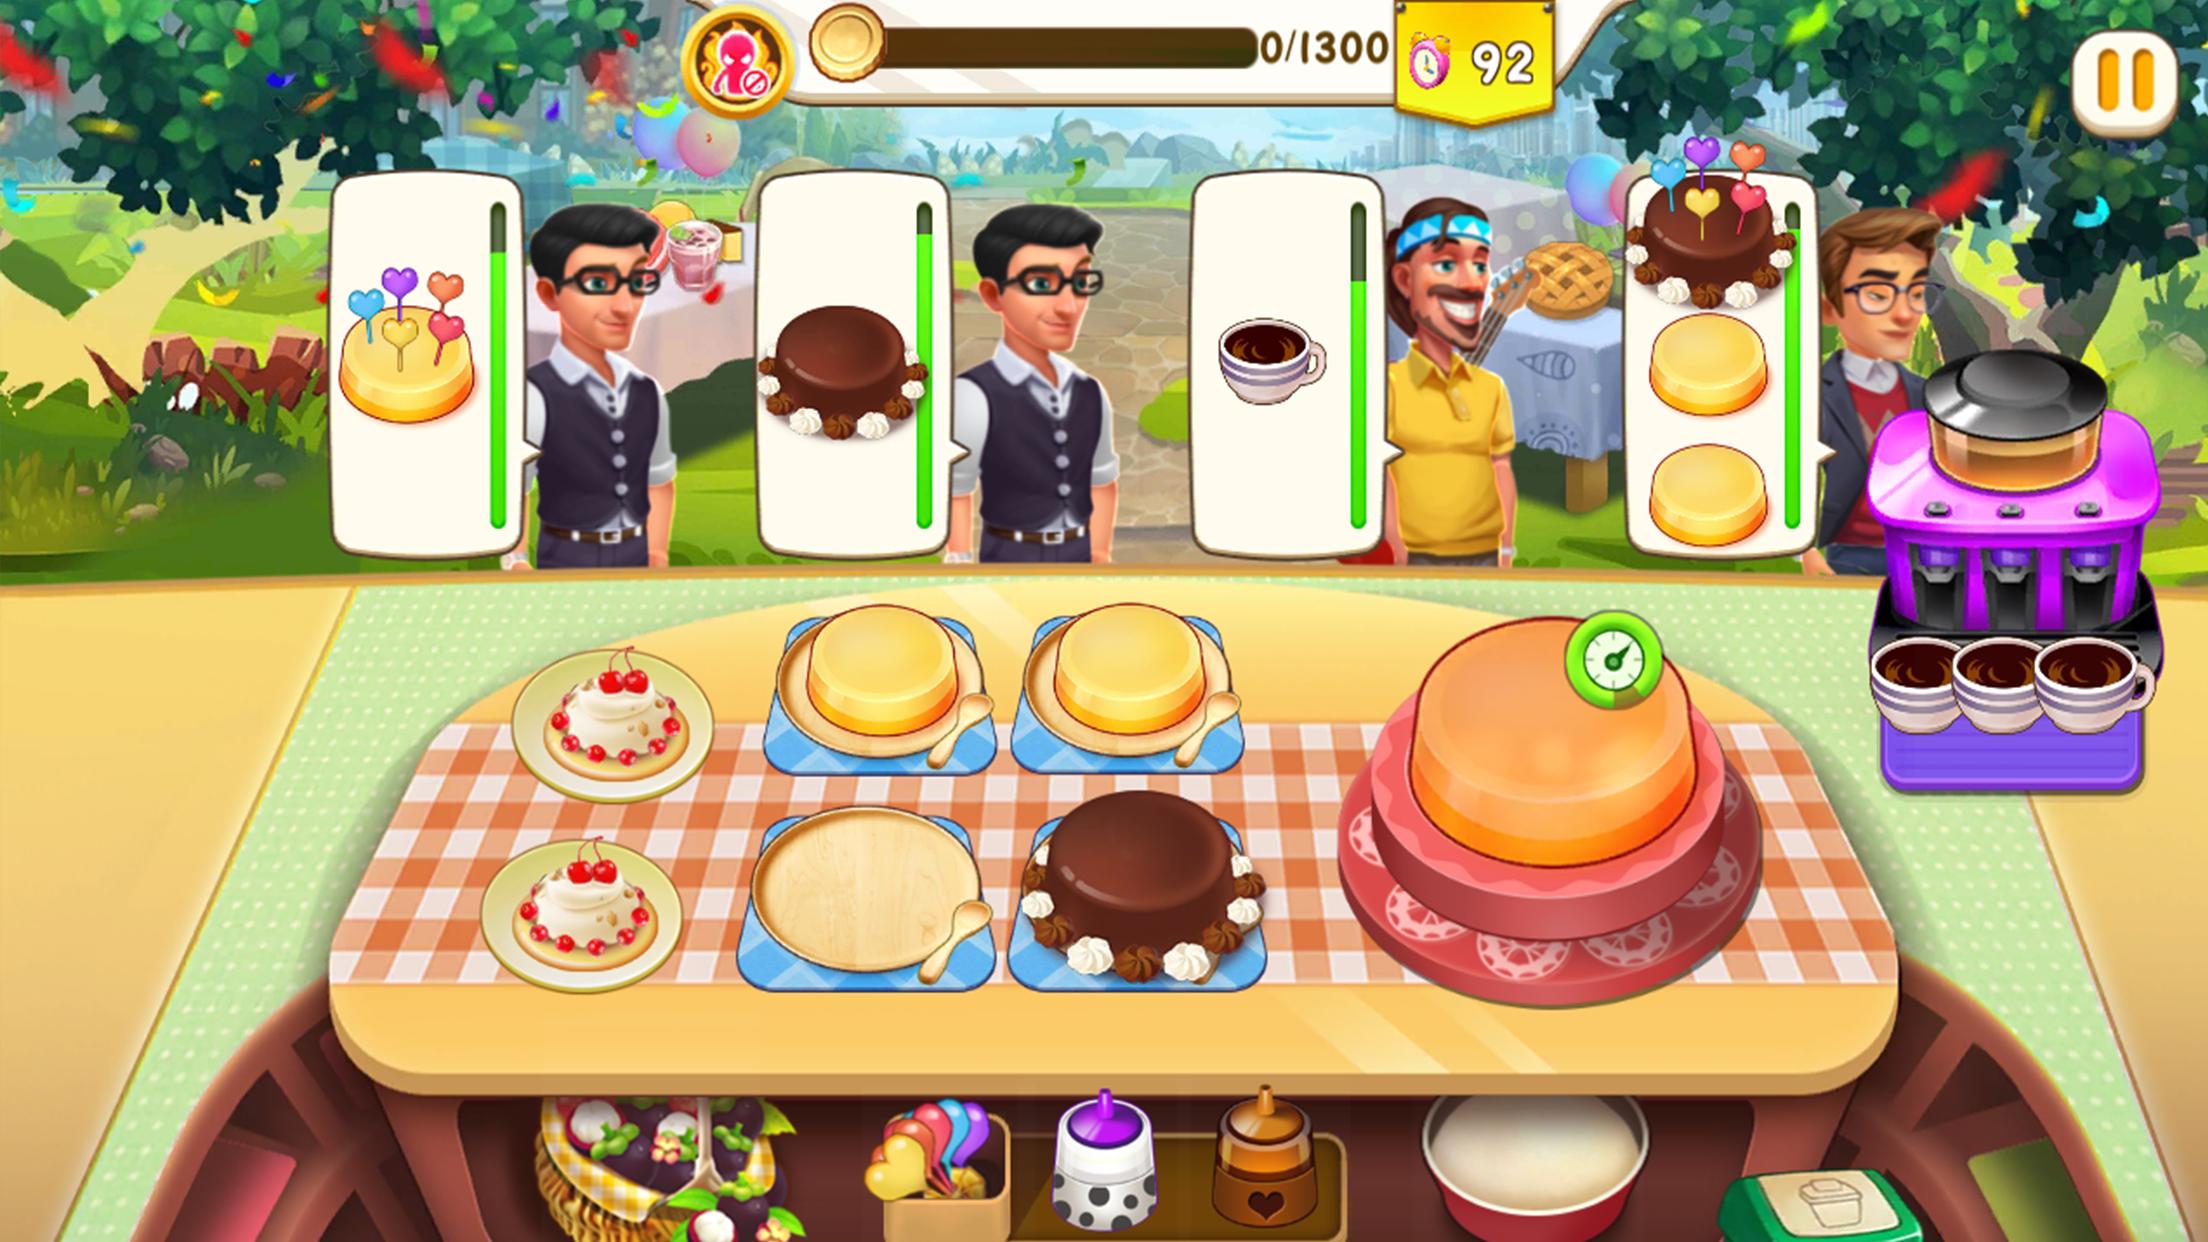 Cooking Rush Bake it to delicious 2.1.2 Screenshot 18